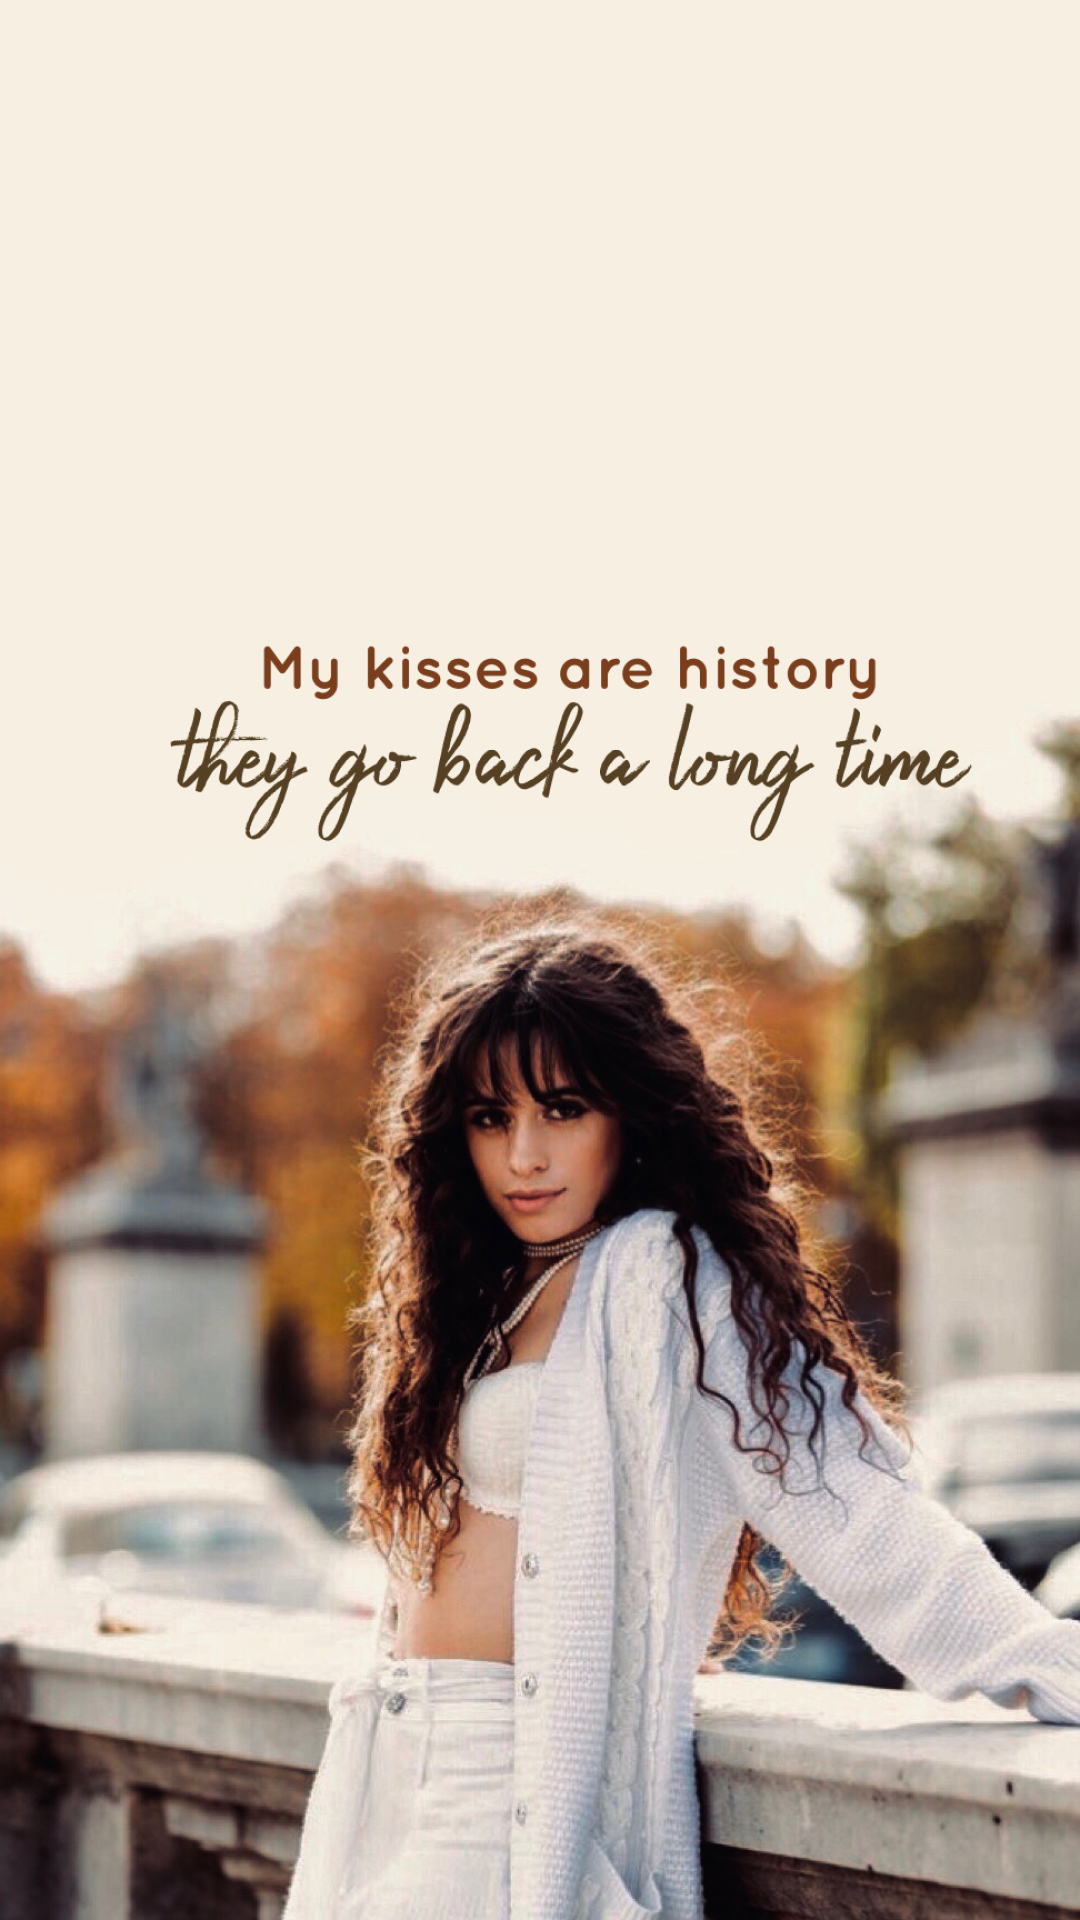 Camila cabello aesthetic wallpapers, Captivating visuals, Inspiring backgrounds, Harmonious vibes, 1080x1920 Full HD Phone